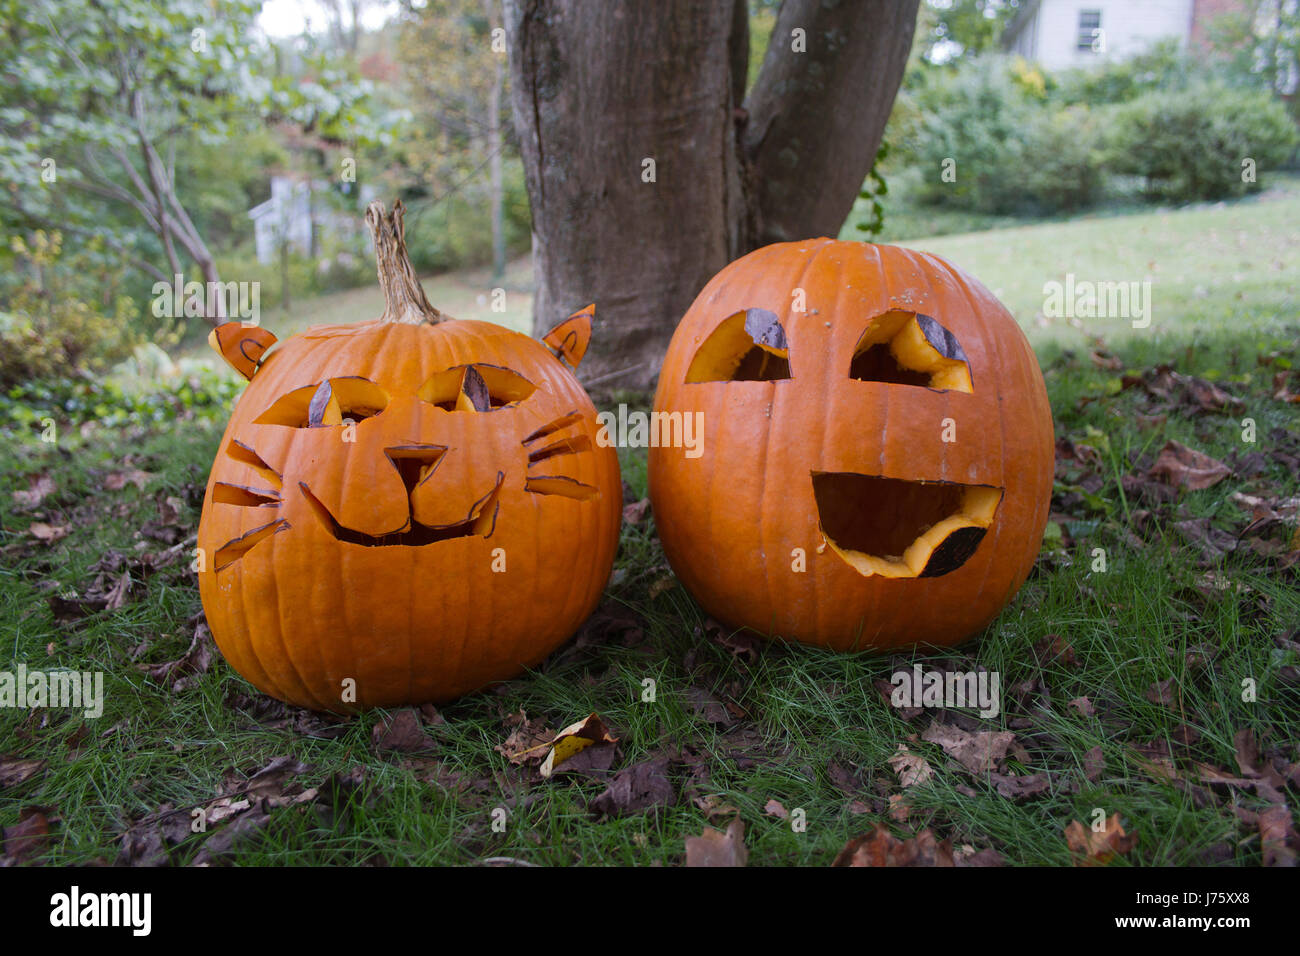 Two colorful Halloween Jack-o-lanterns with happy looking faces sit side by side in the autumn, leaf strewn grass. One is carved to look like a cat wi Stock Photo